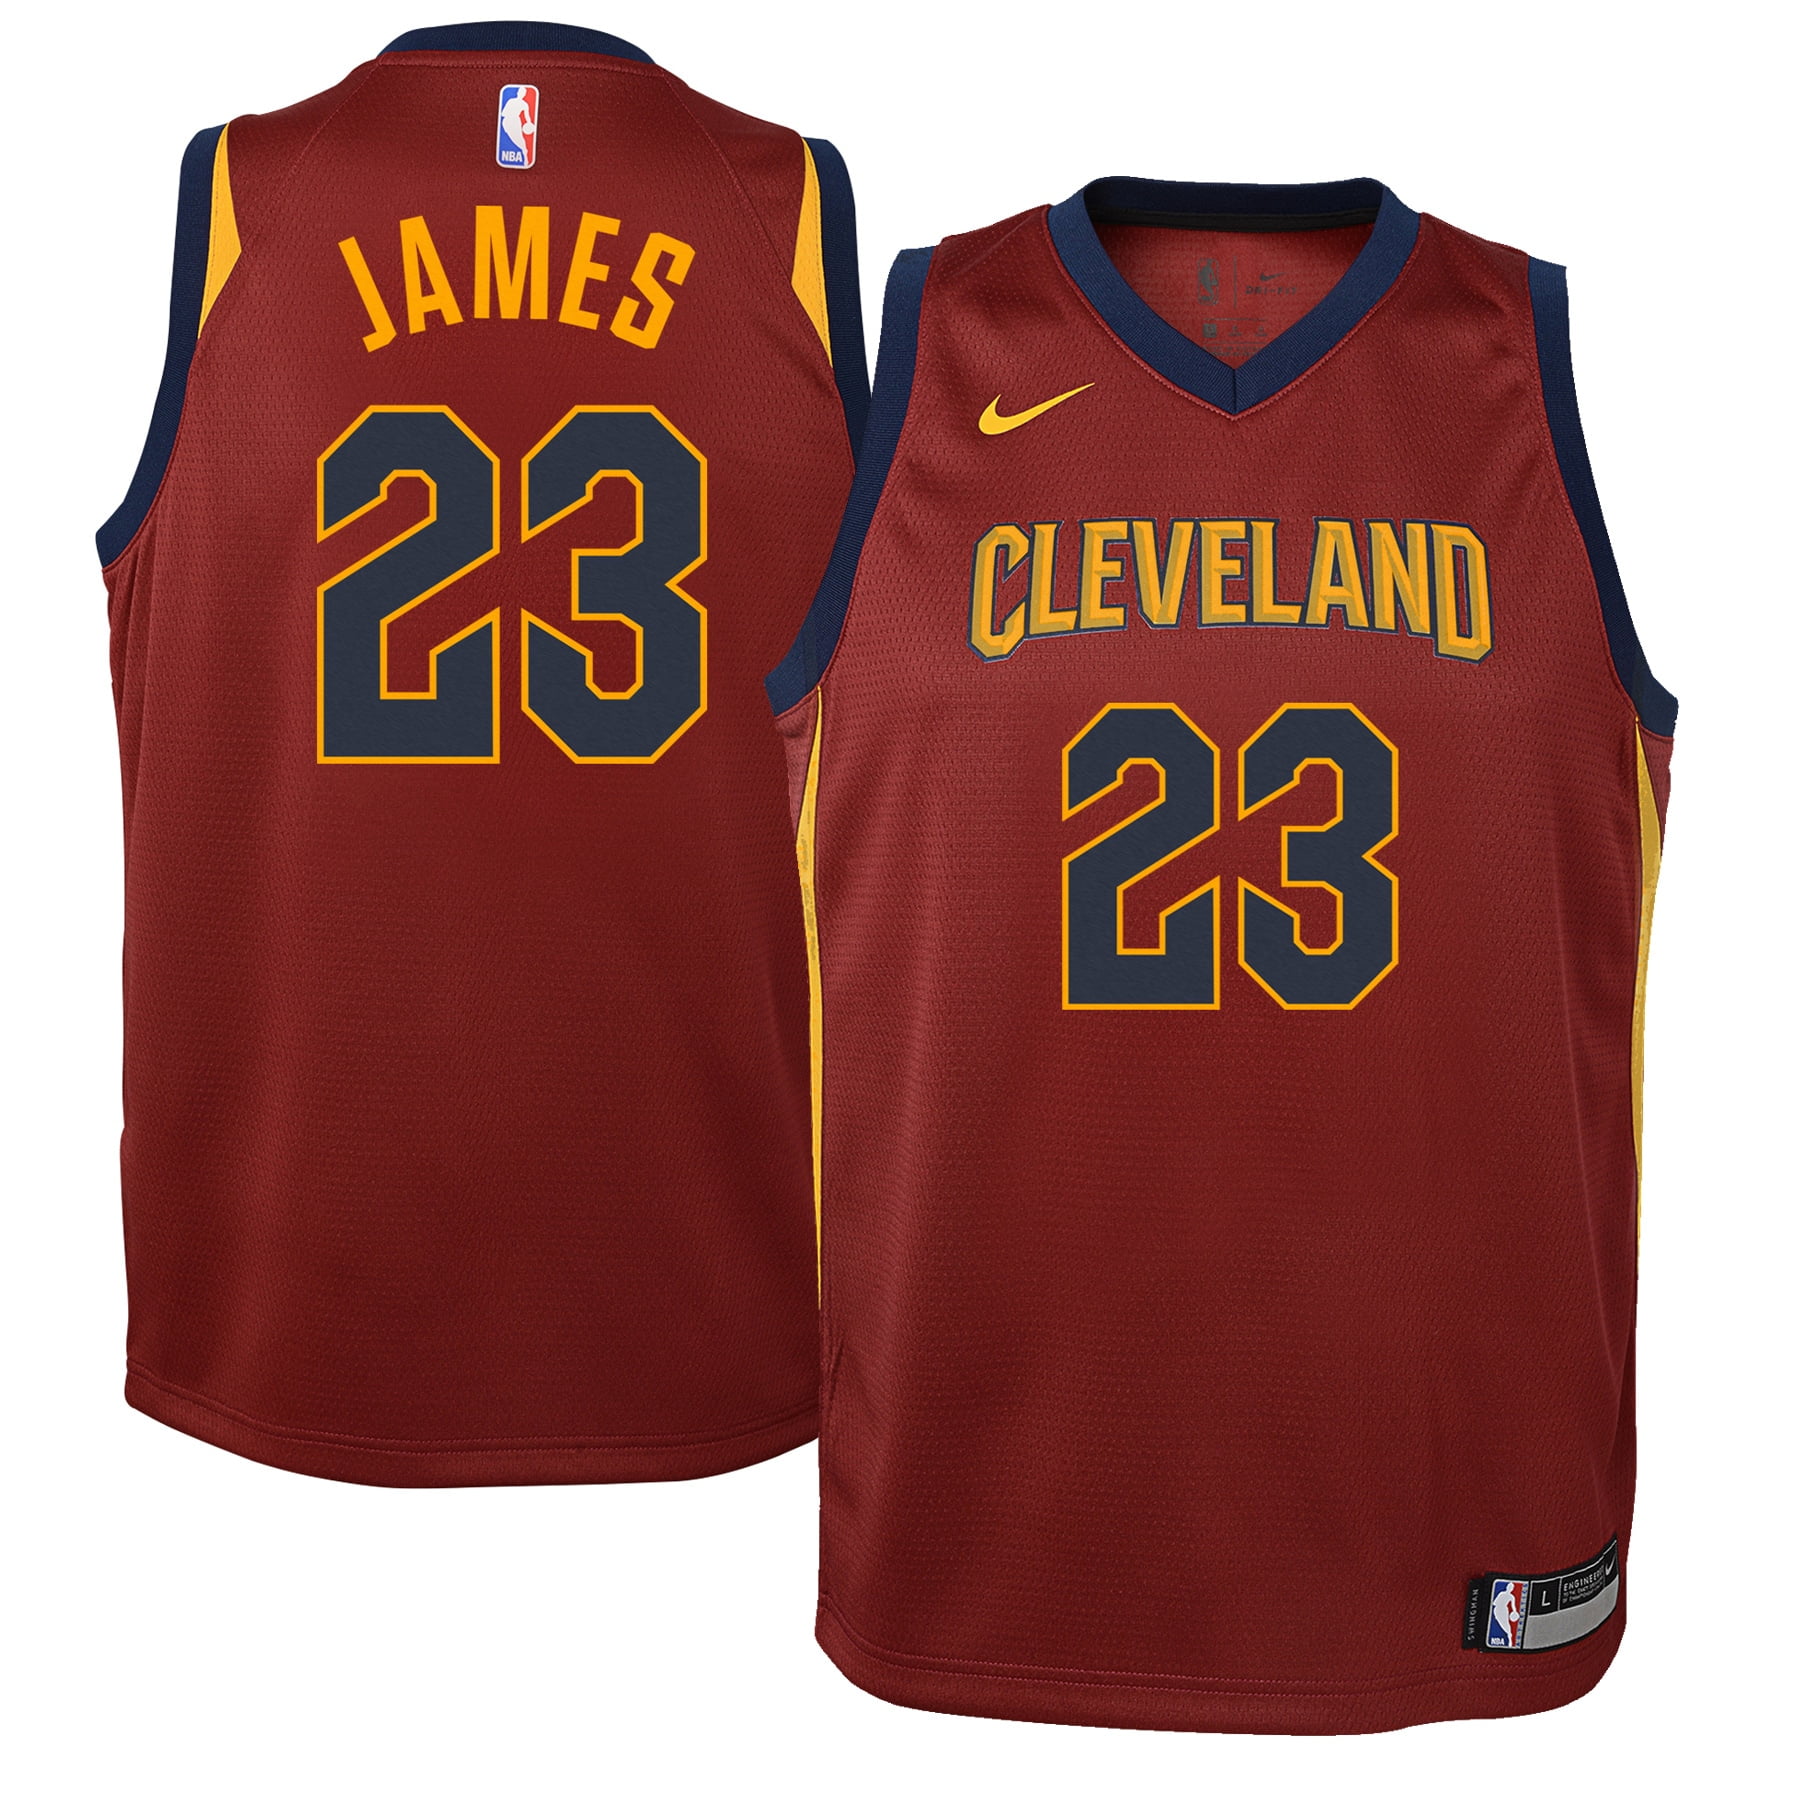 lebron james youth jersey